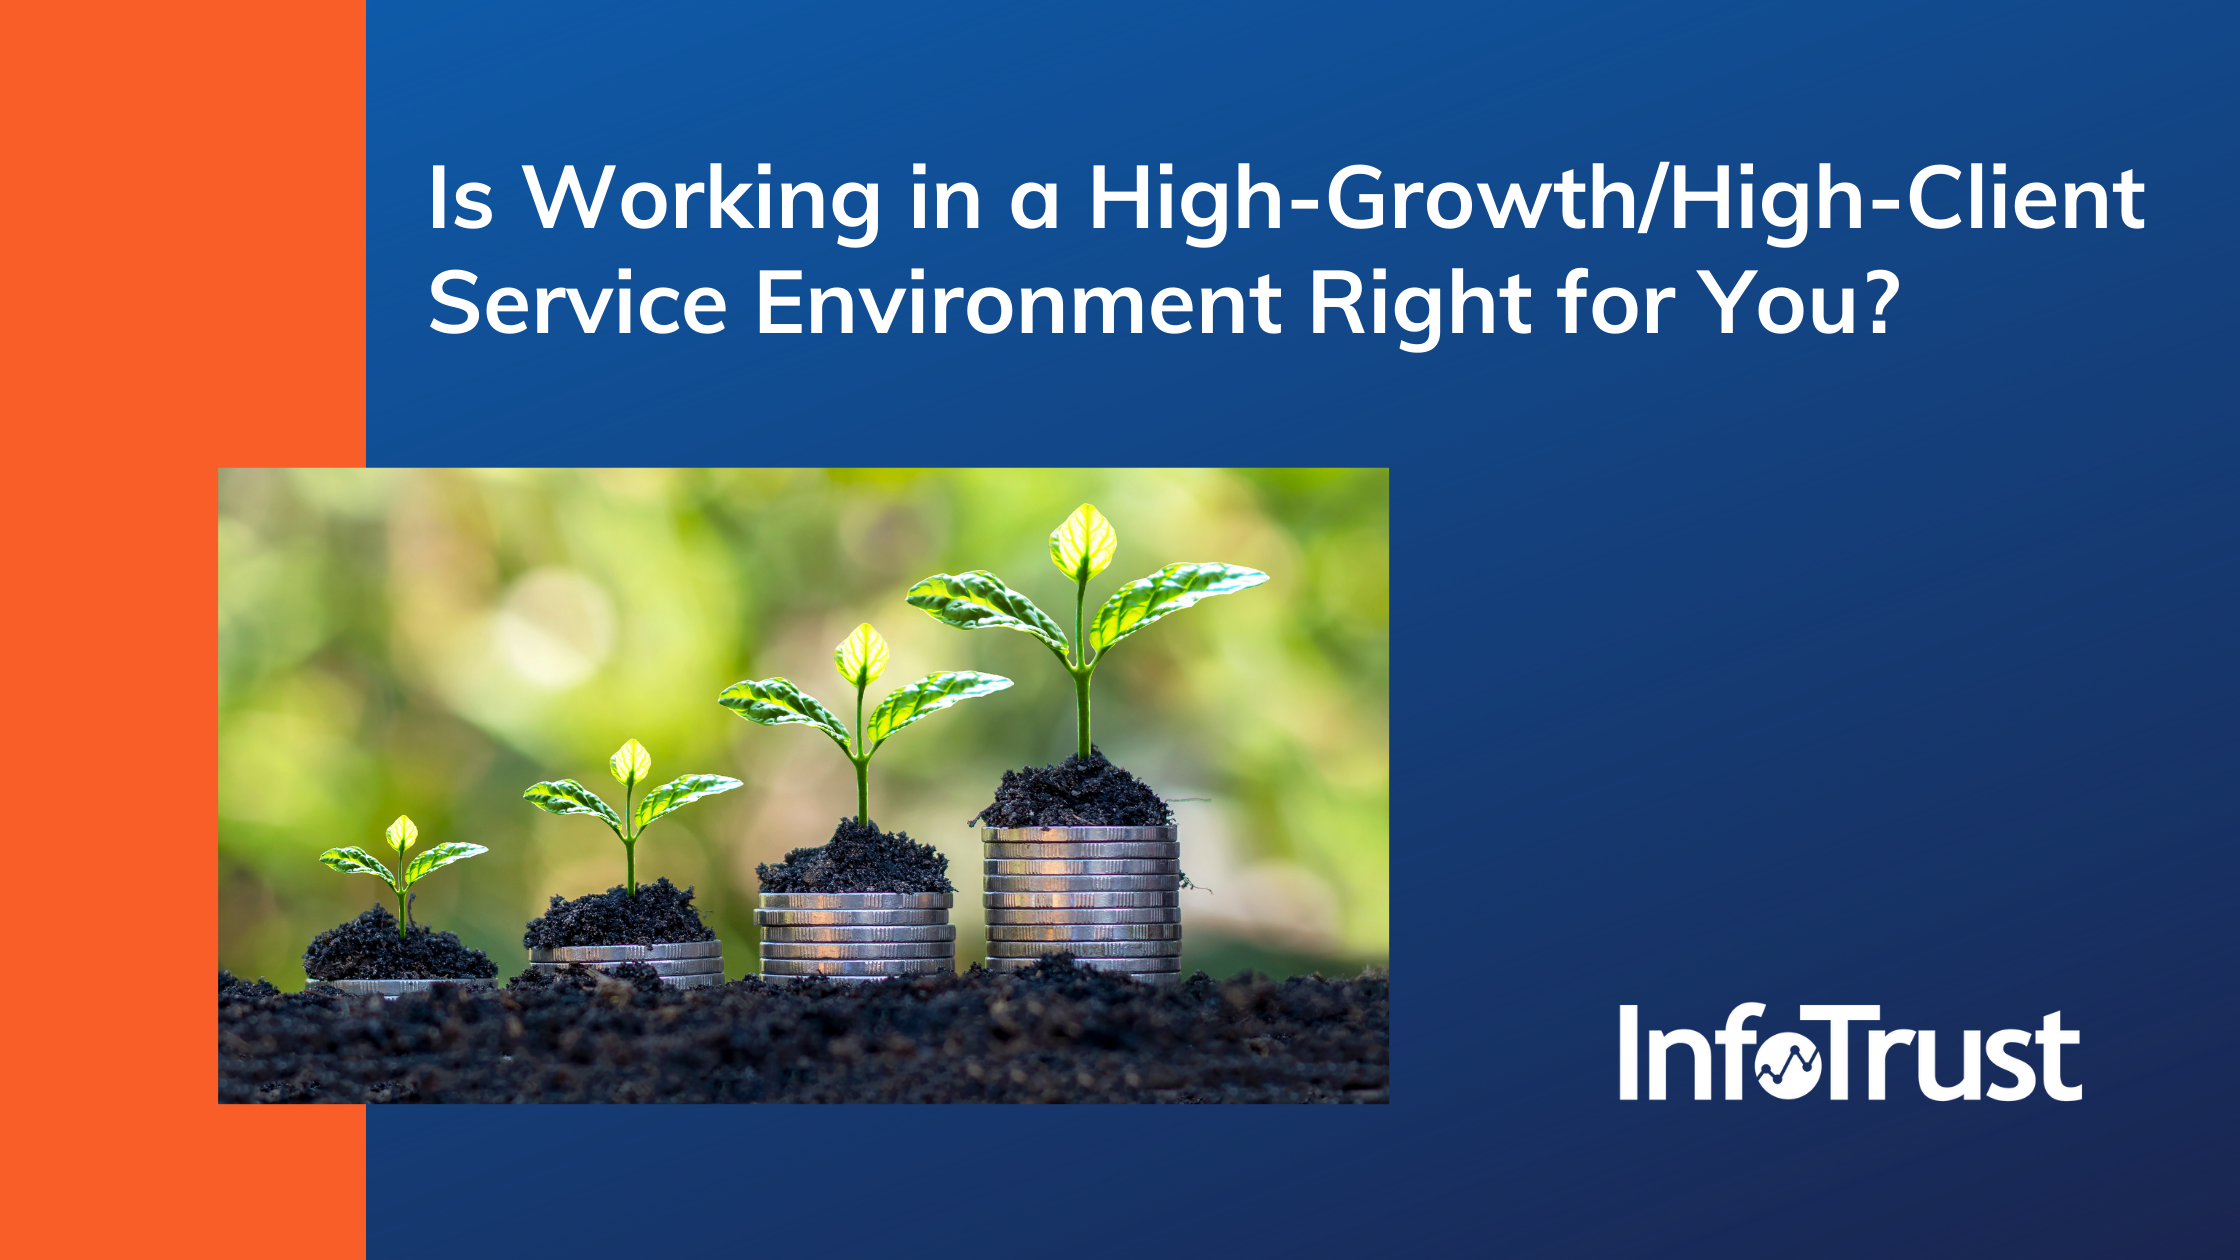 Is Working in a High-Growth/High-Client Service Environment Right for You?